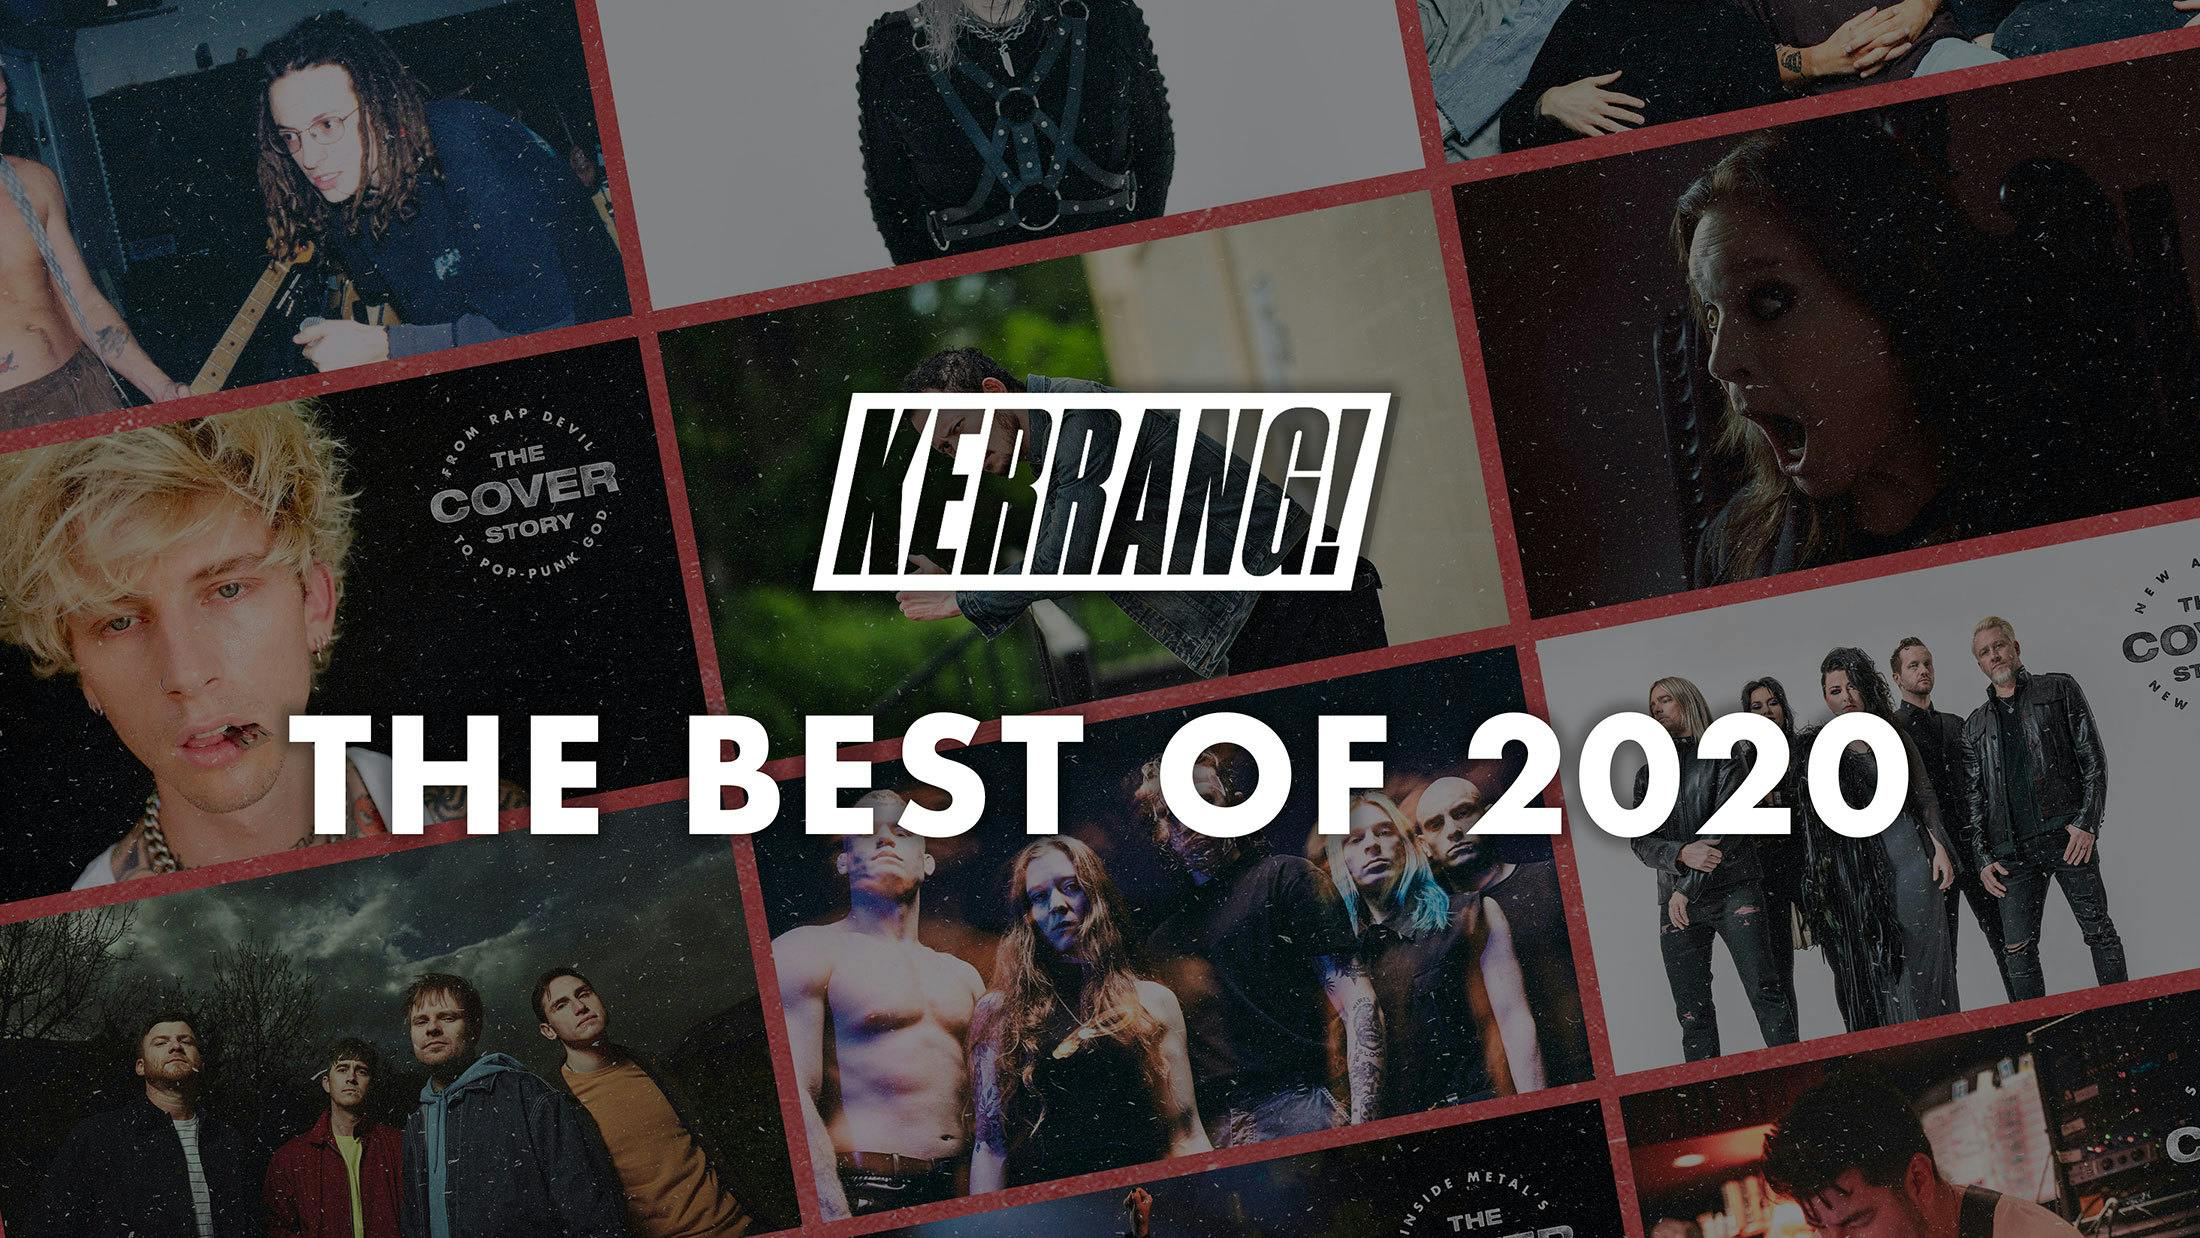 The Best Of 2020: The stories that mattered most to you this year